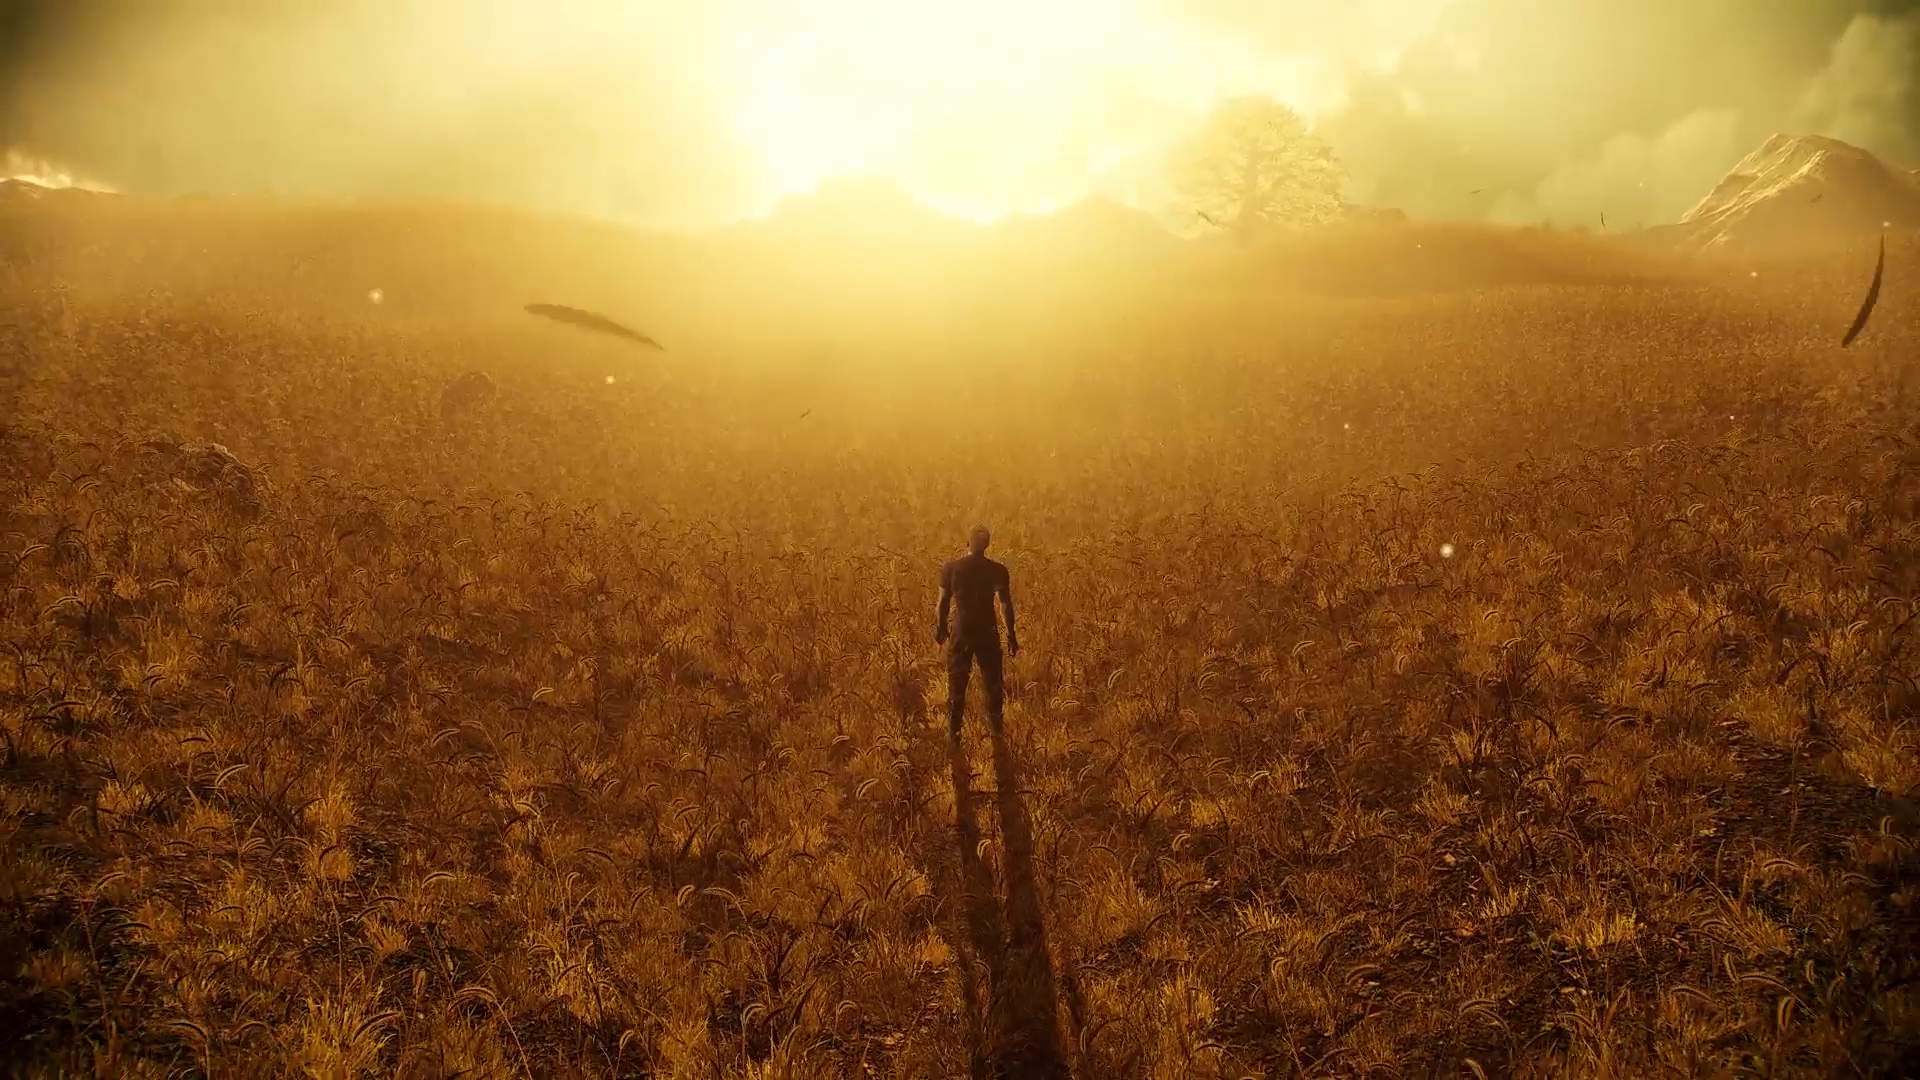 Jack standing in a sun-drenched wheat field.